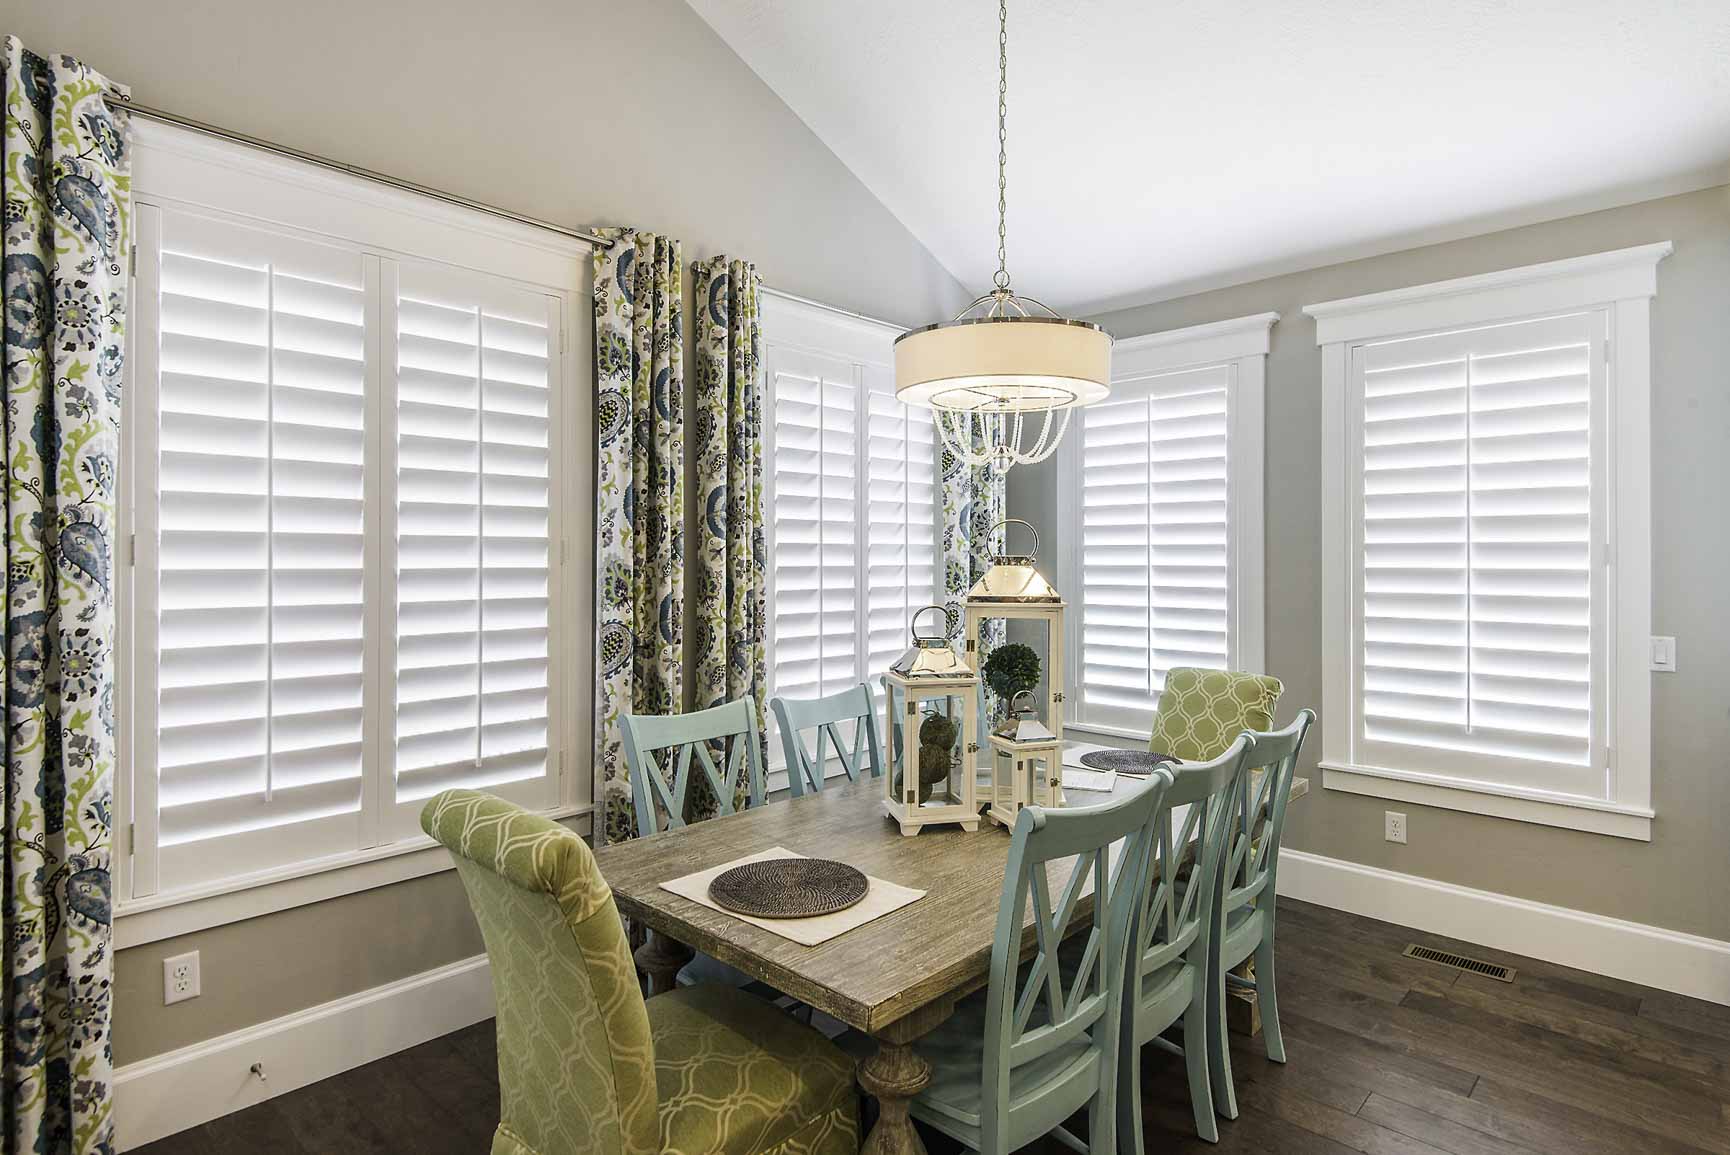 Greatest Plantation Shutters With Curtains Unlock more insights!